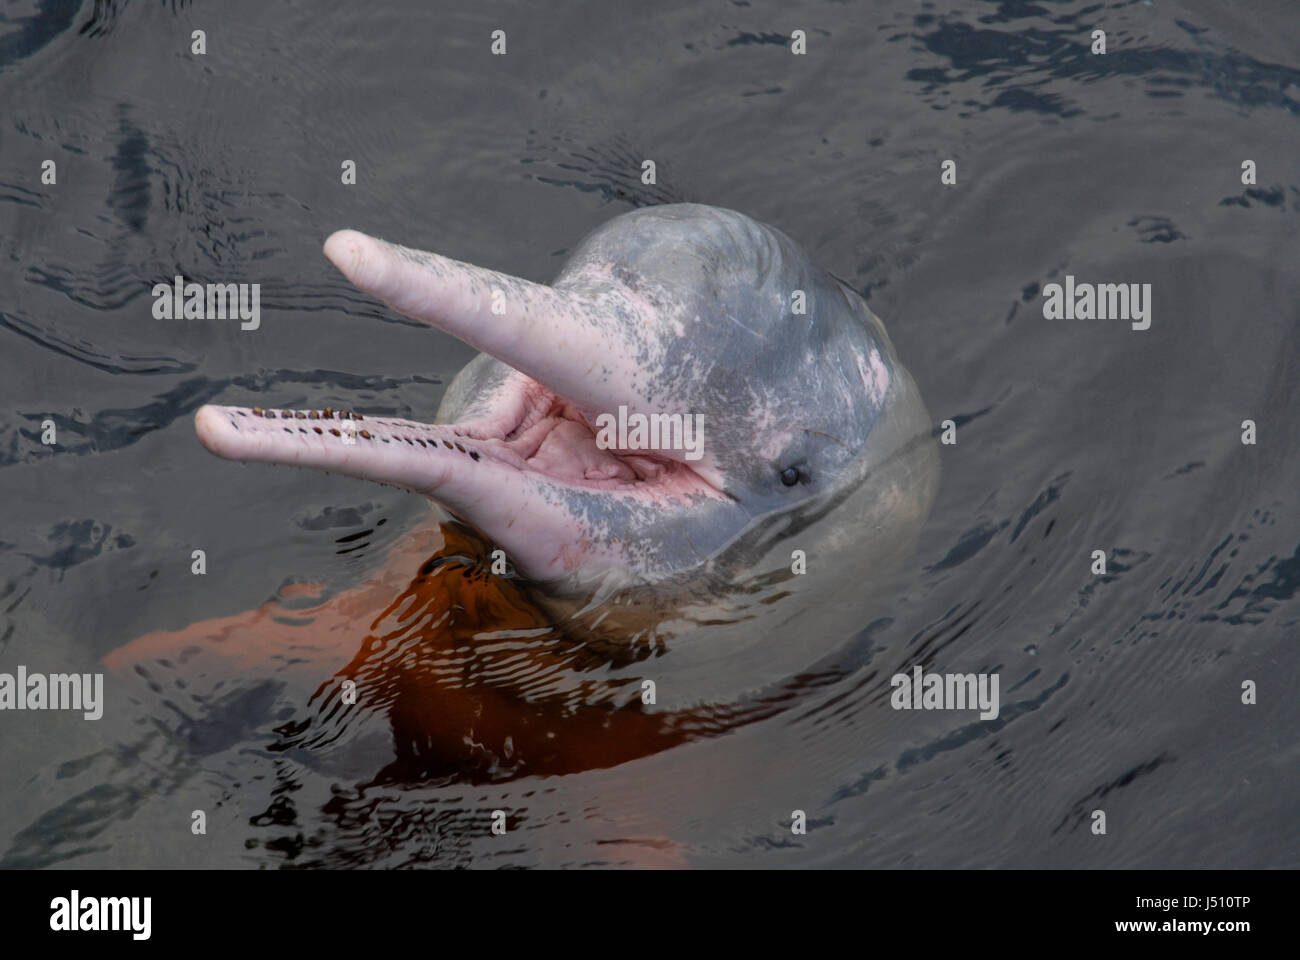 A Pink River Dolphin in the dark waters of the Amazon River near Manaus Stock Photo